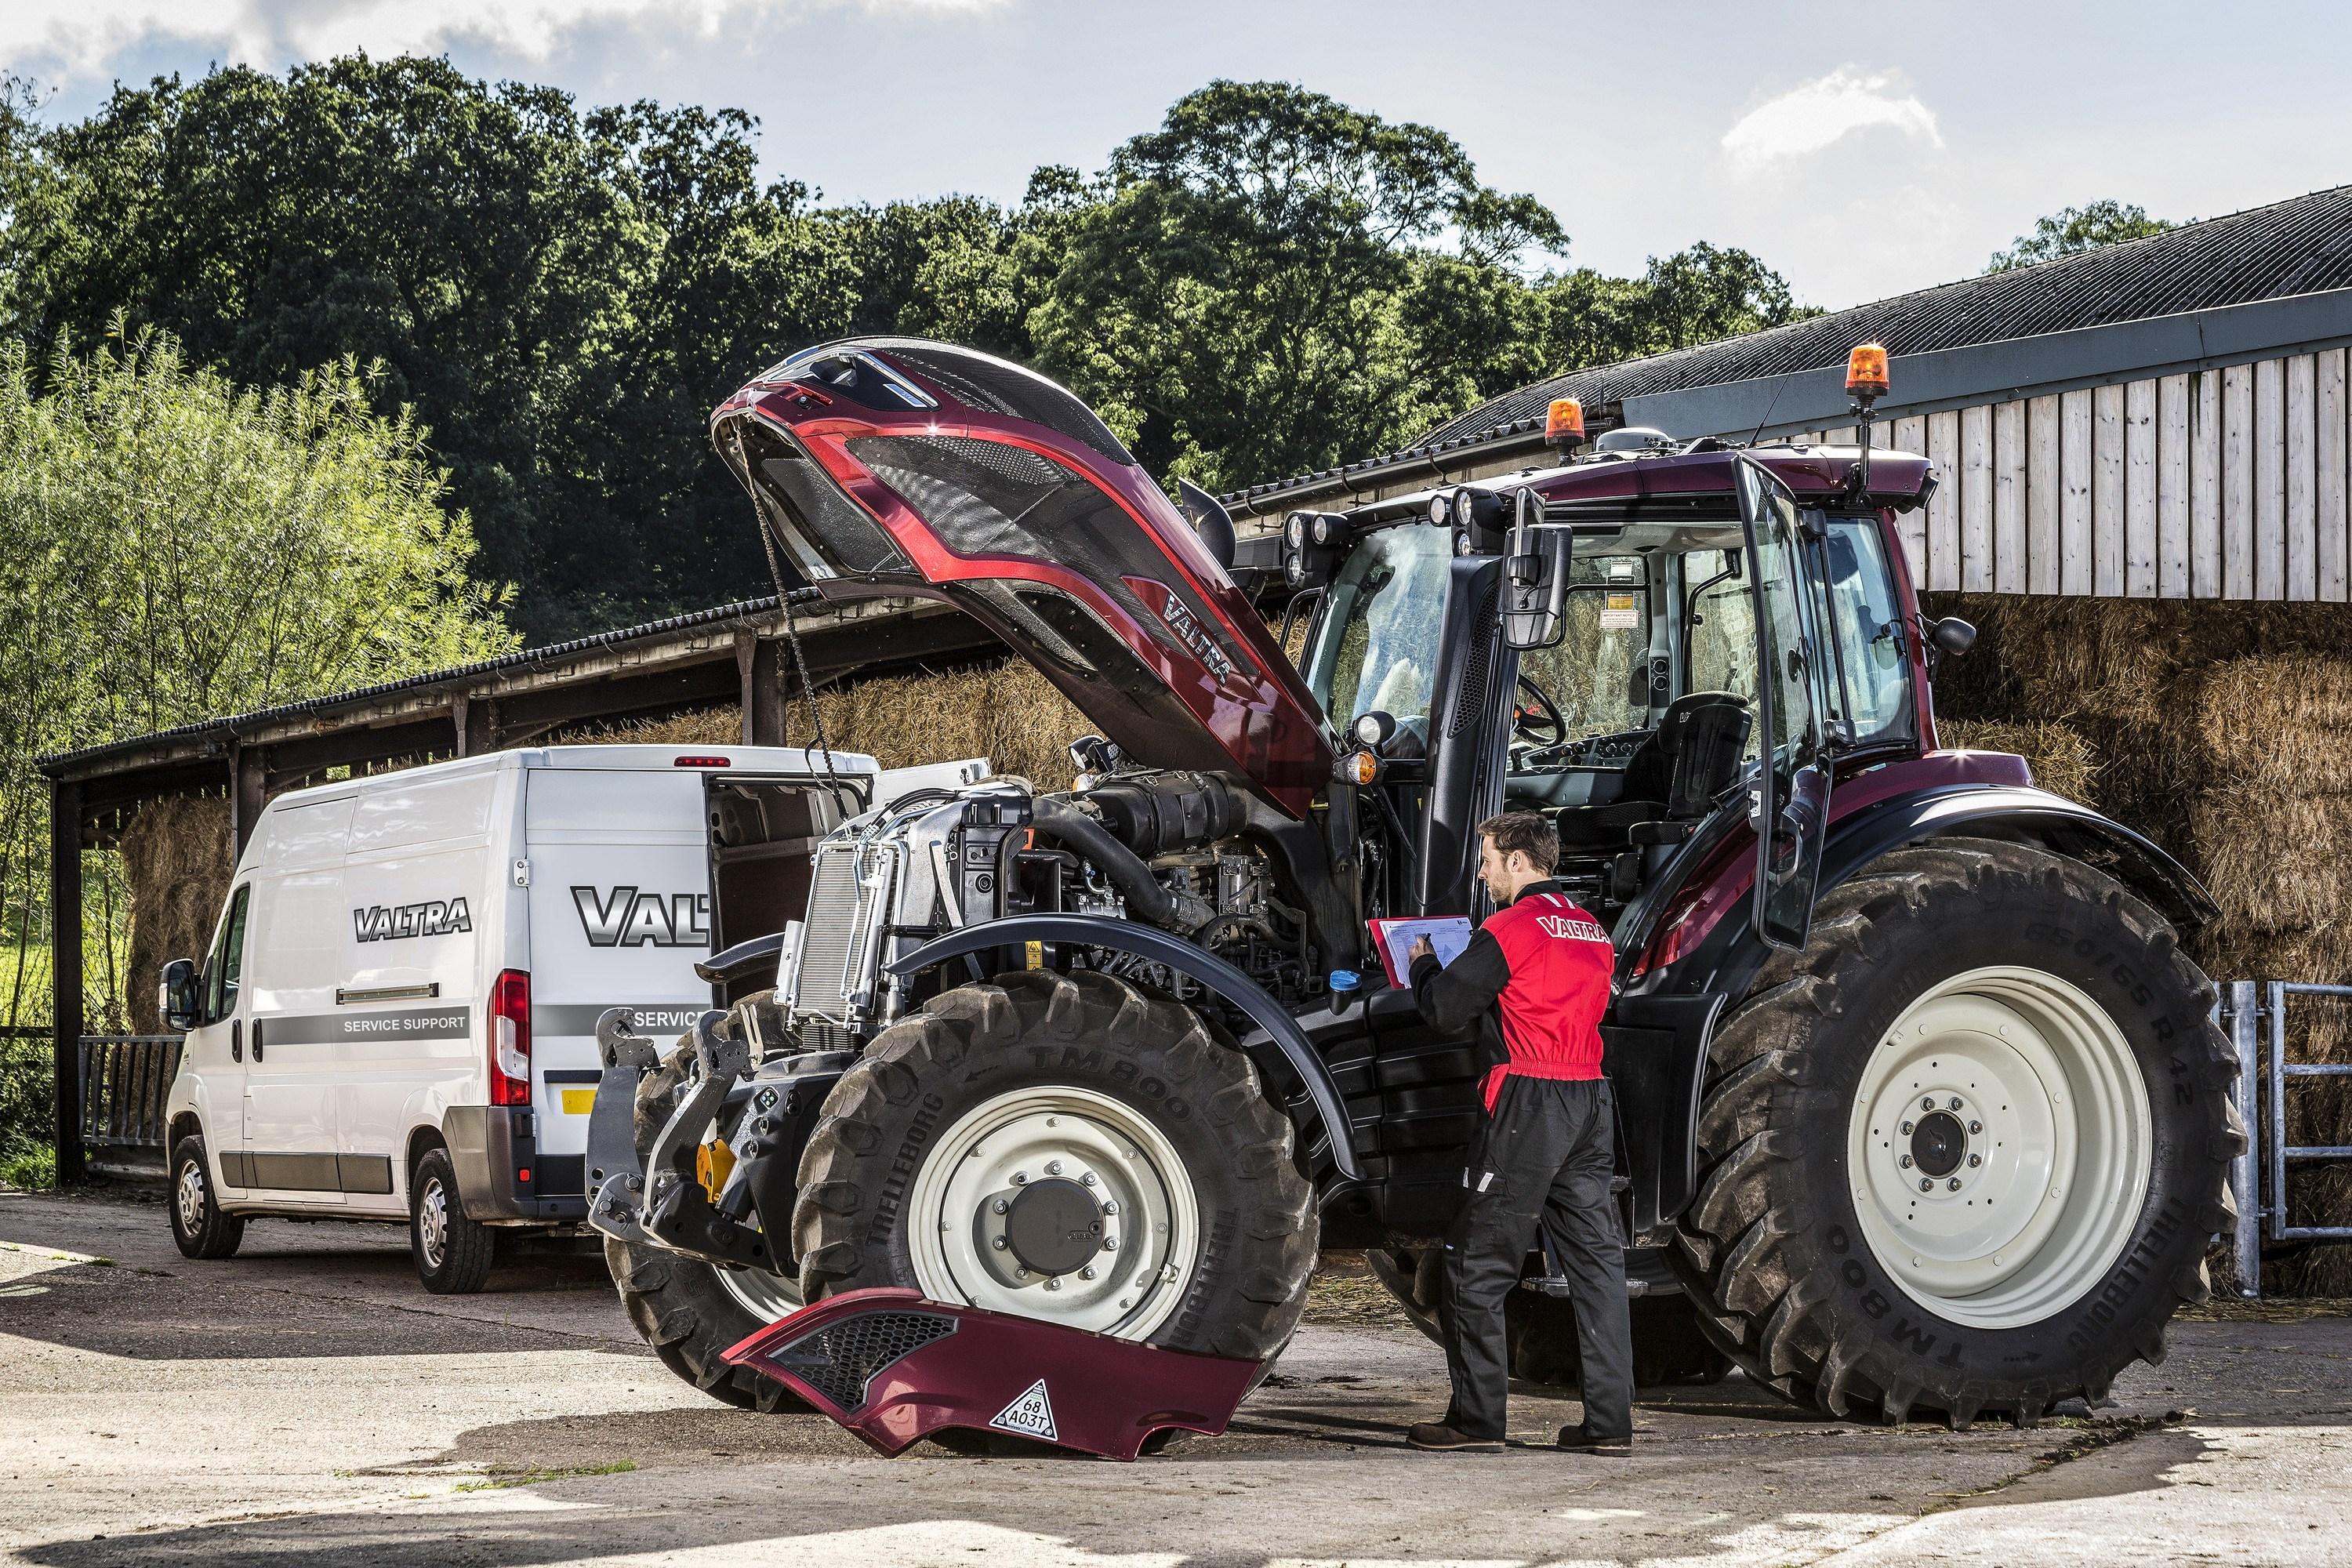 Valtra Service inspection during off season